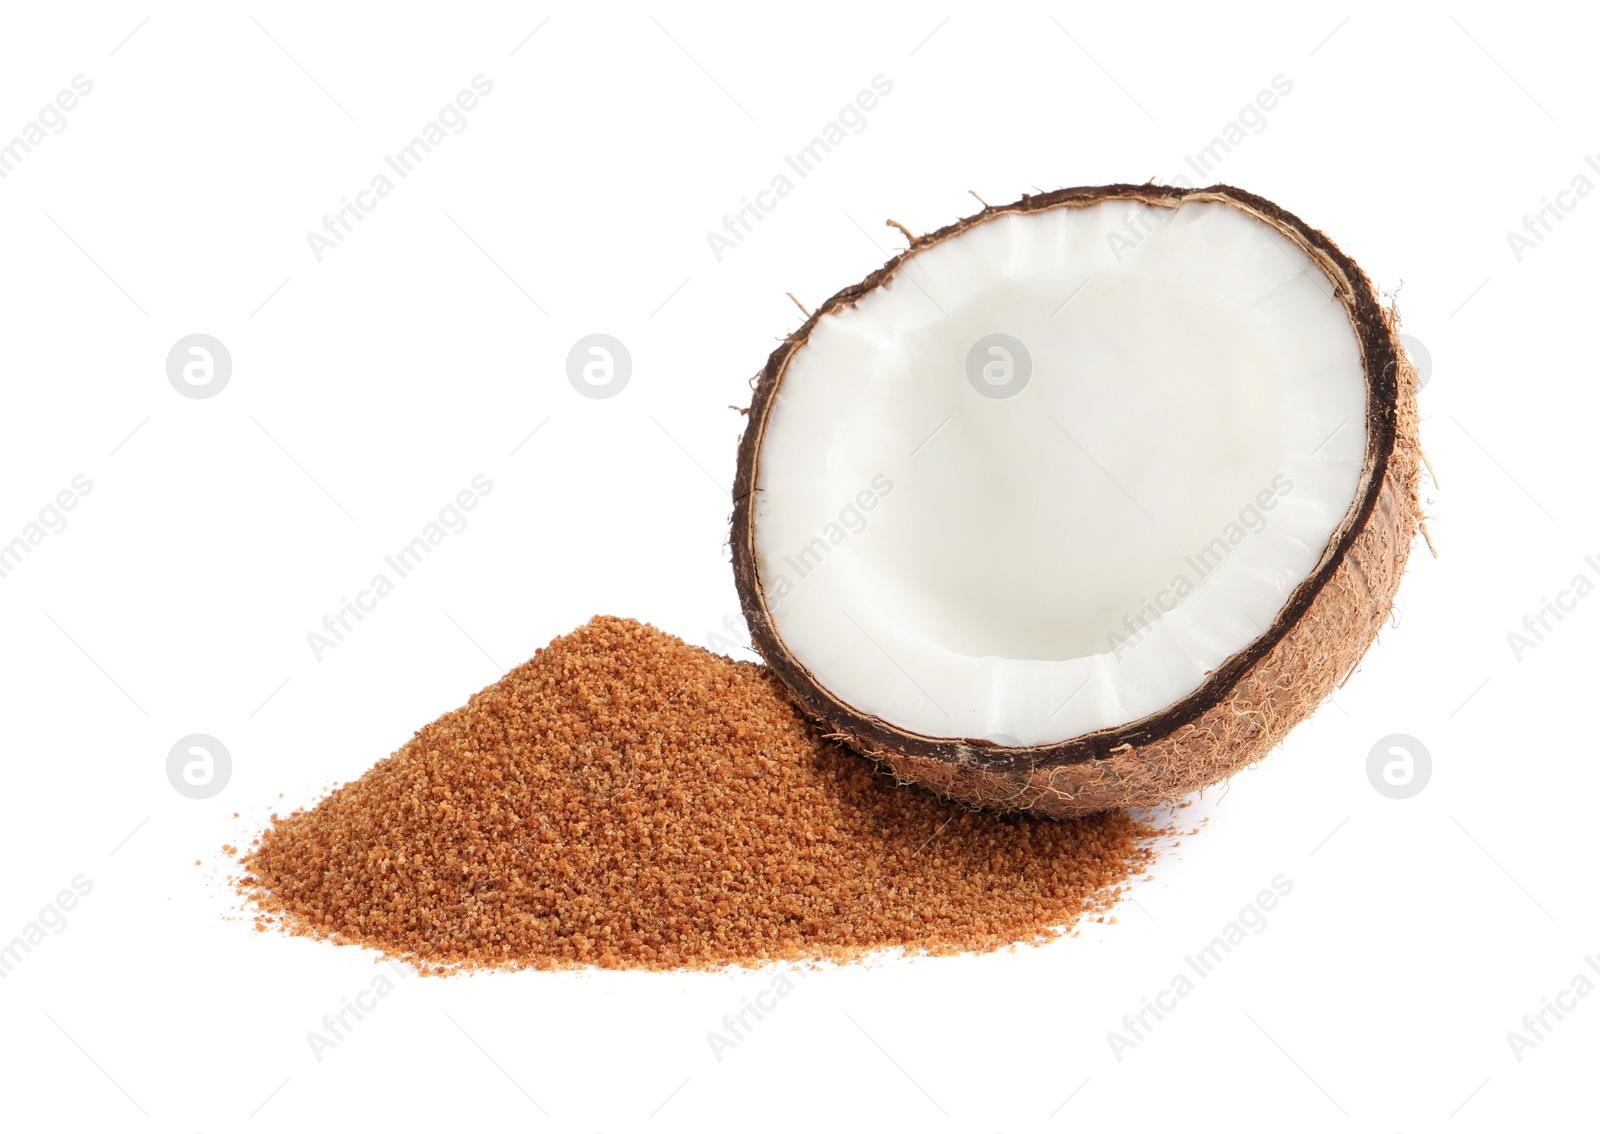 Photo of Ripe coconut and pile of brown sugar on white background